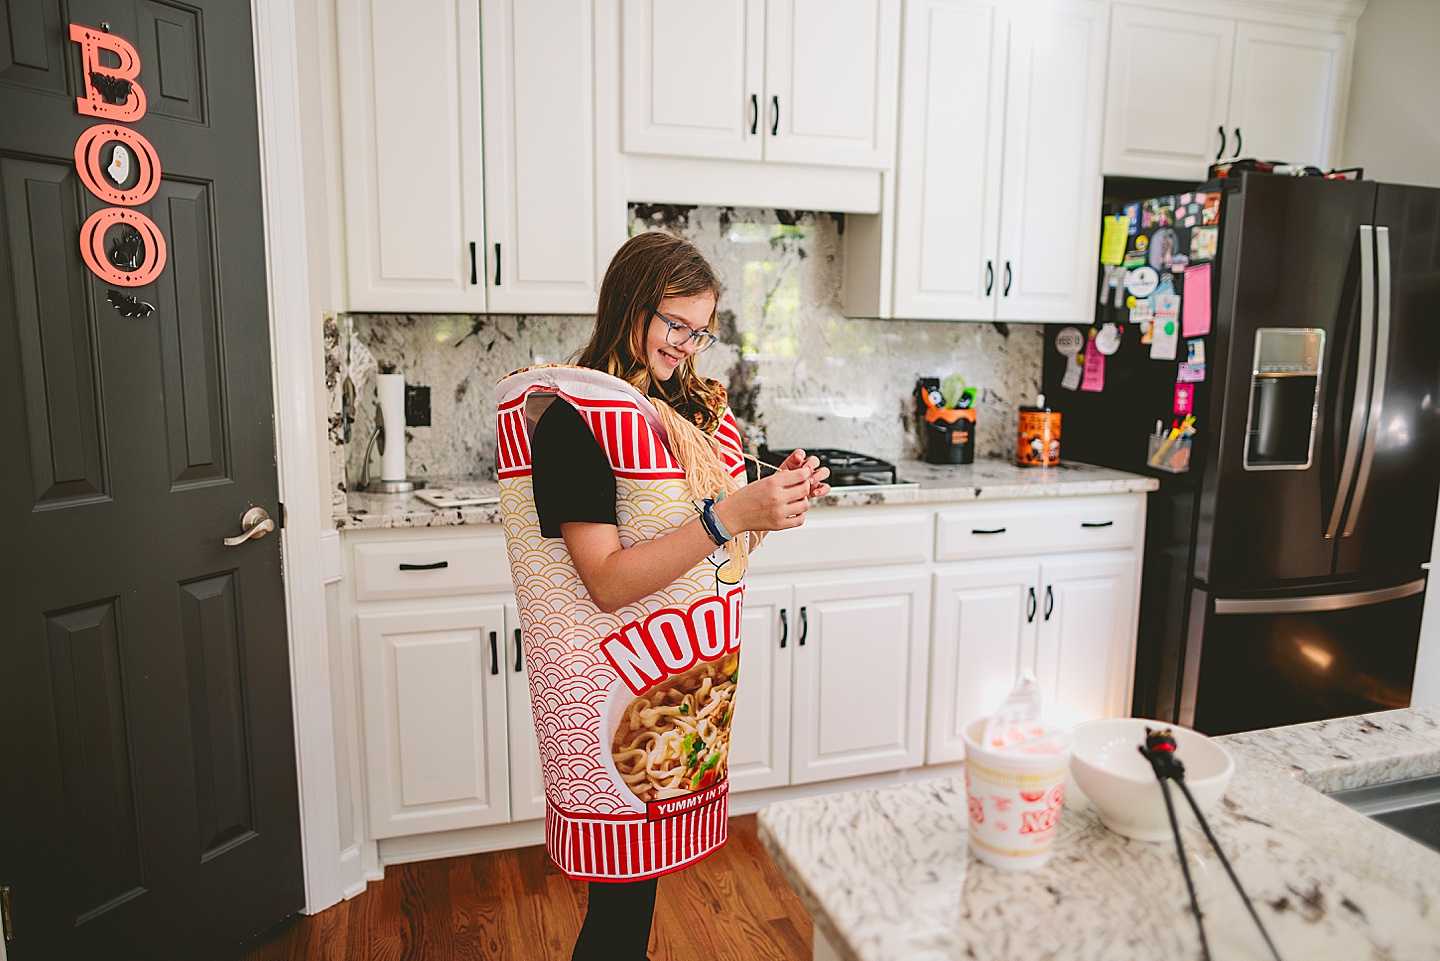 Girl in Noodles Halloween costume laughing in kitchen as she prepares noodle soup